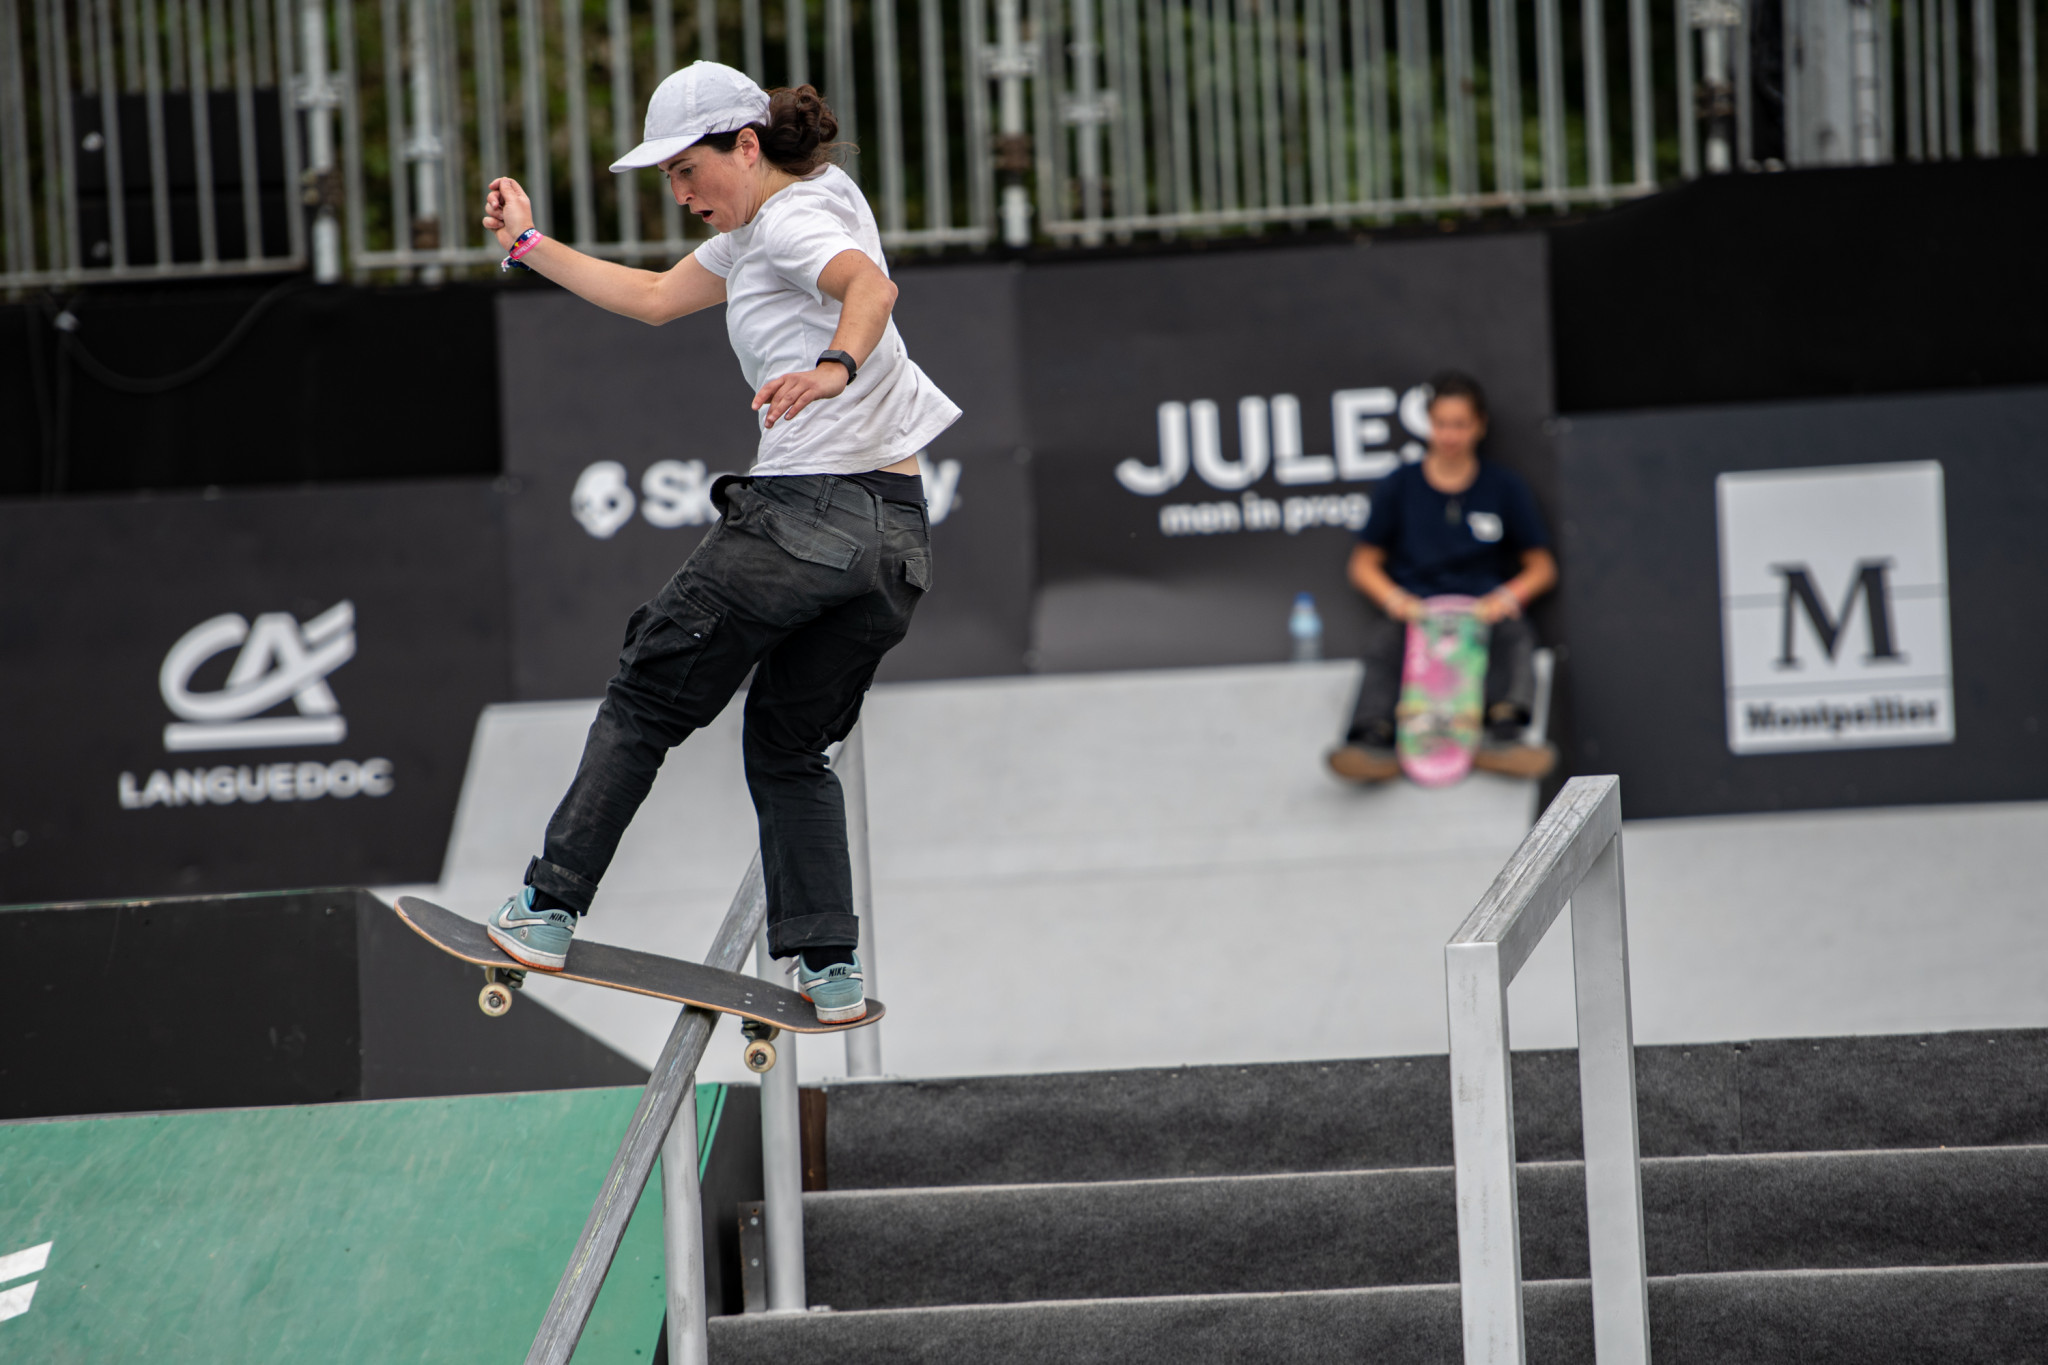 French Tokyo 2020 Olympian Charlotte Hym won the women's street skateboard event to take the first gold medal of FISE 2022 ©Hurricane - FISE